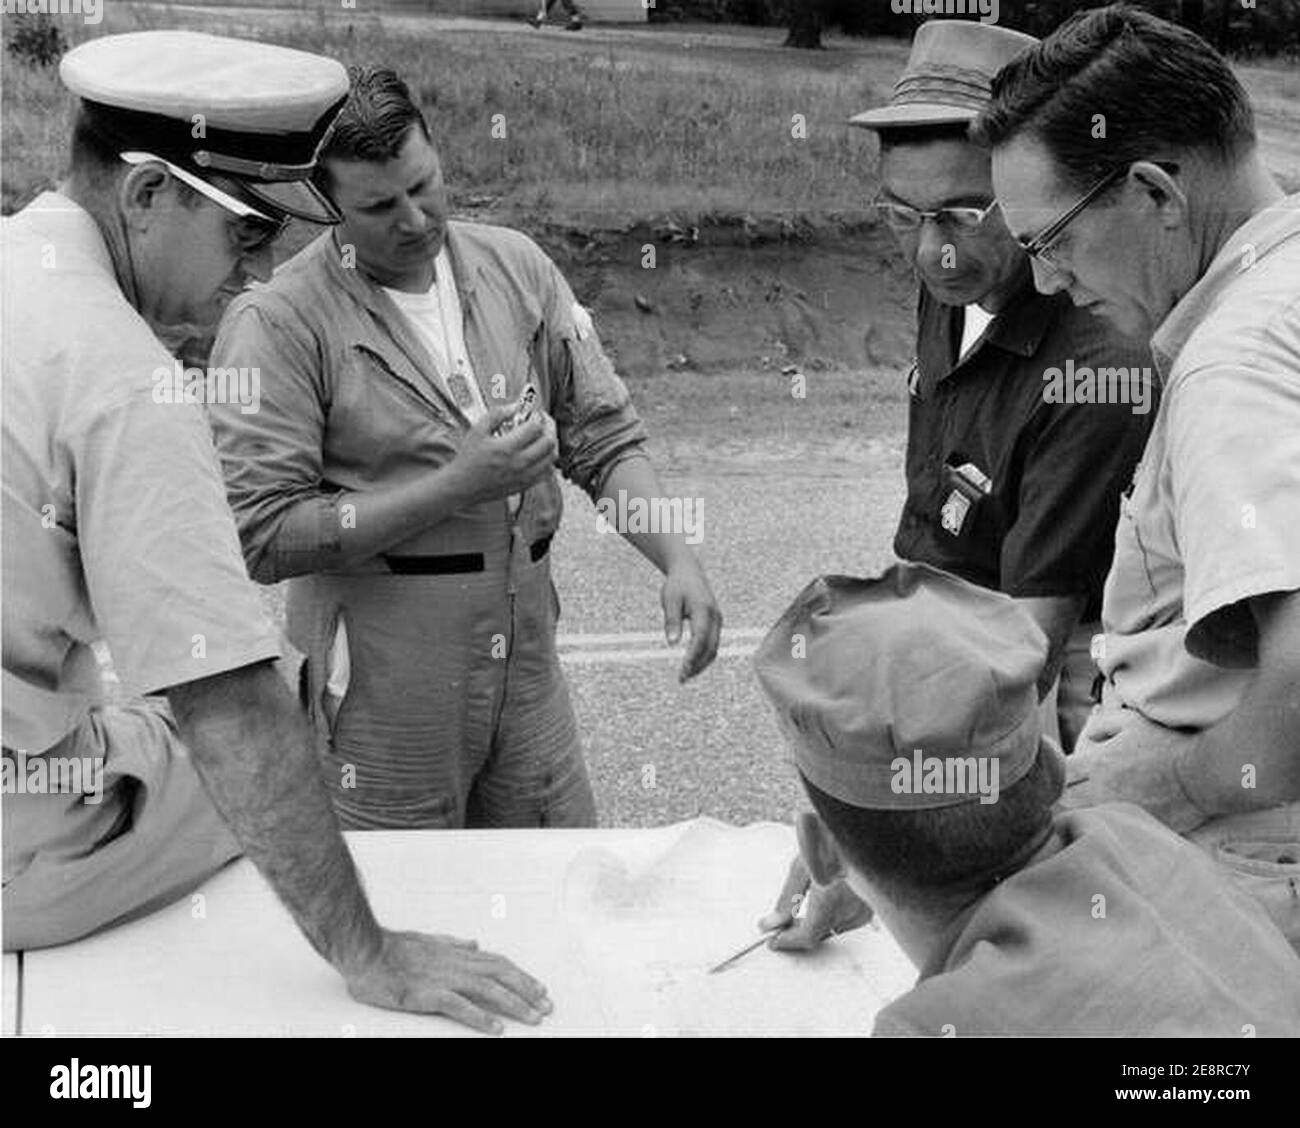 Mississippi KKK Conspiracy Murders June 21 1964 US Navy And Local Law Enforcement Search. Stock Photo